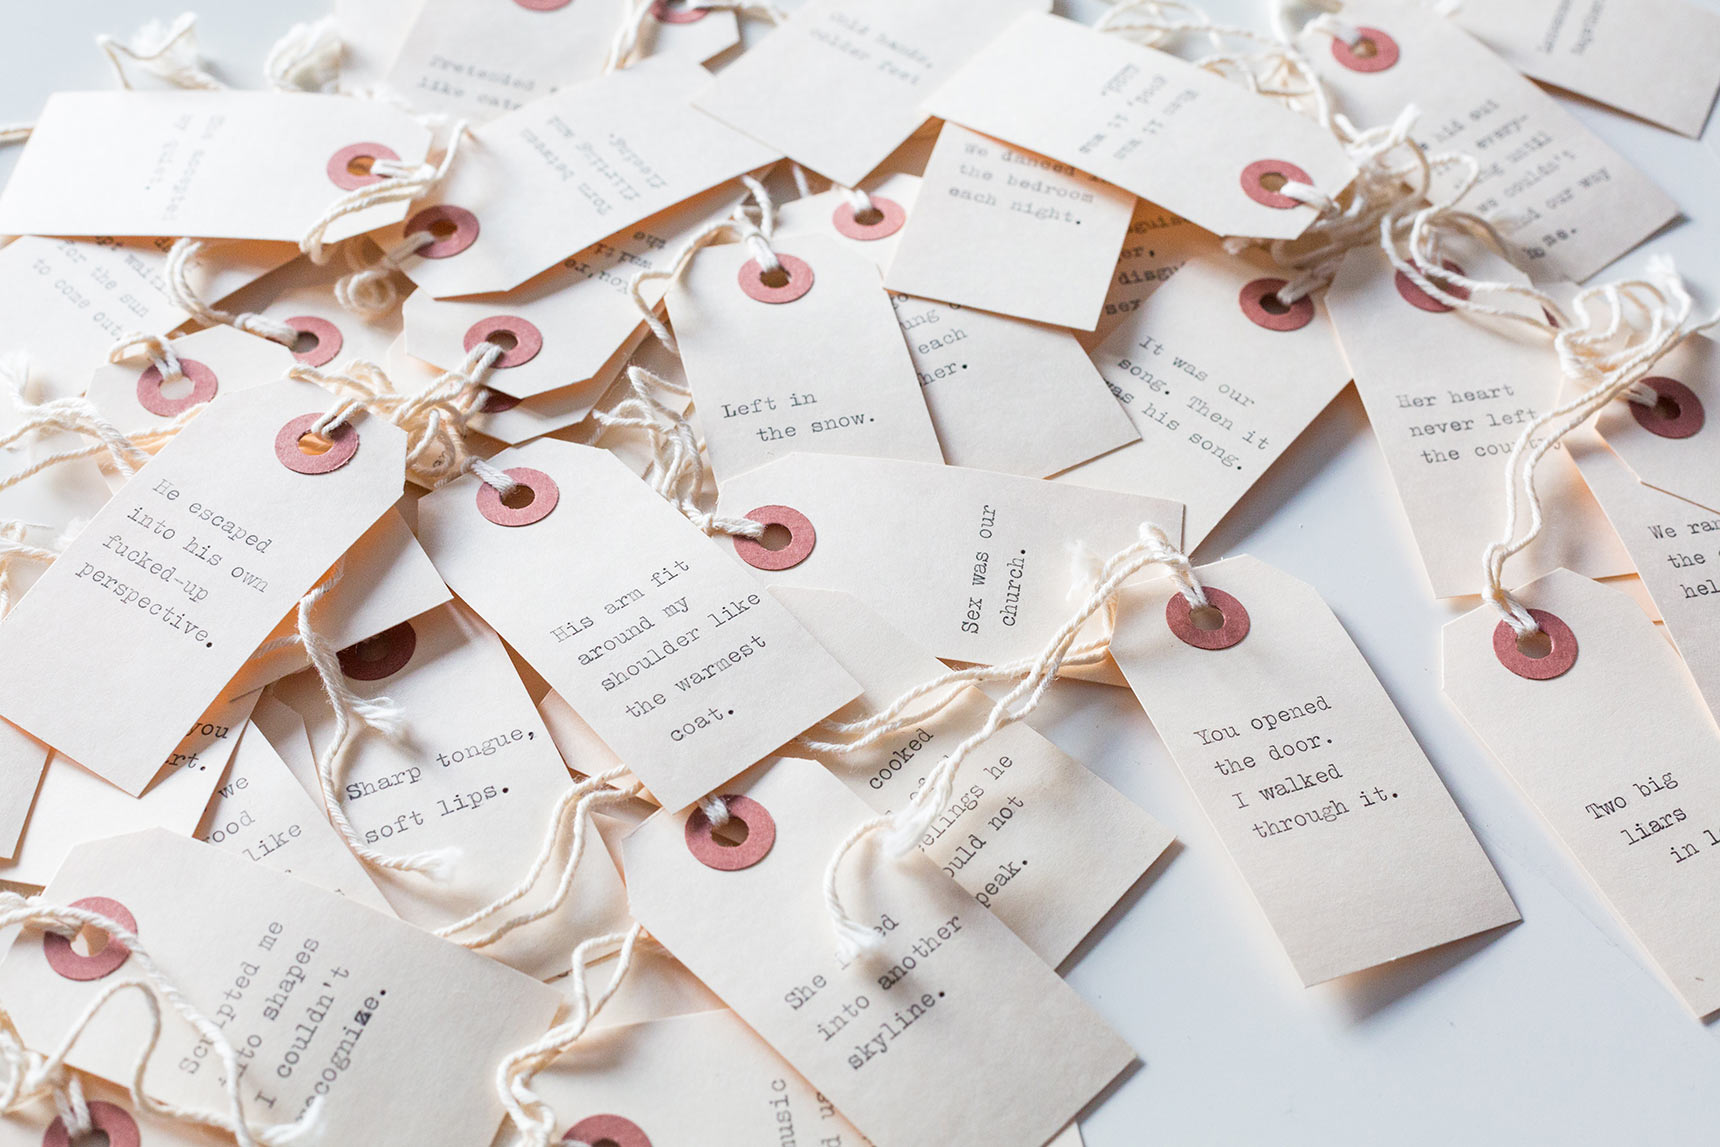 Hang-tags with one-line love stories